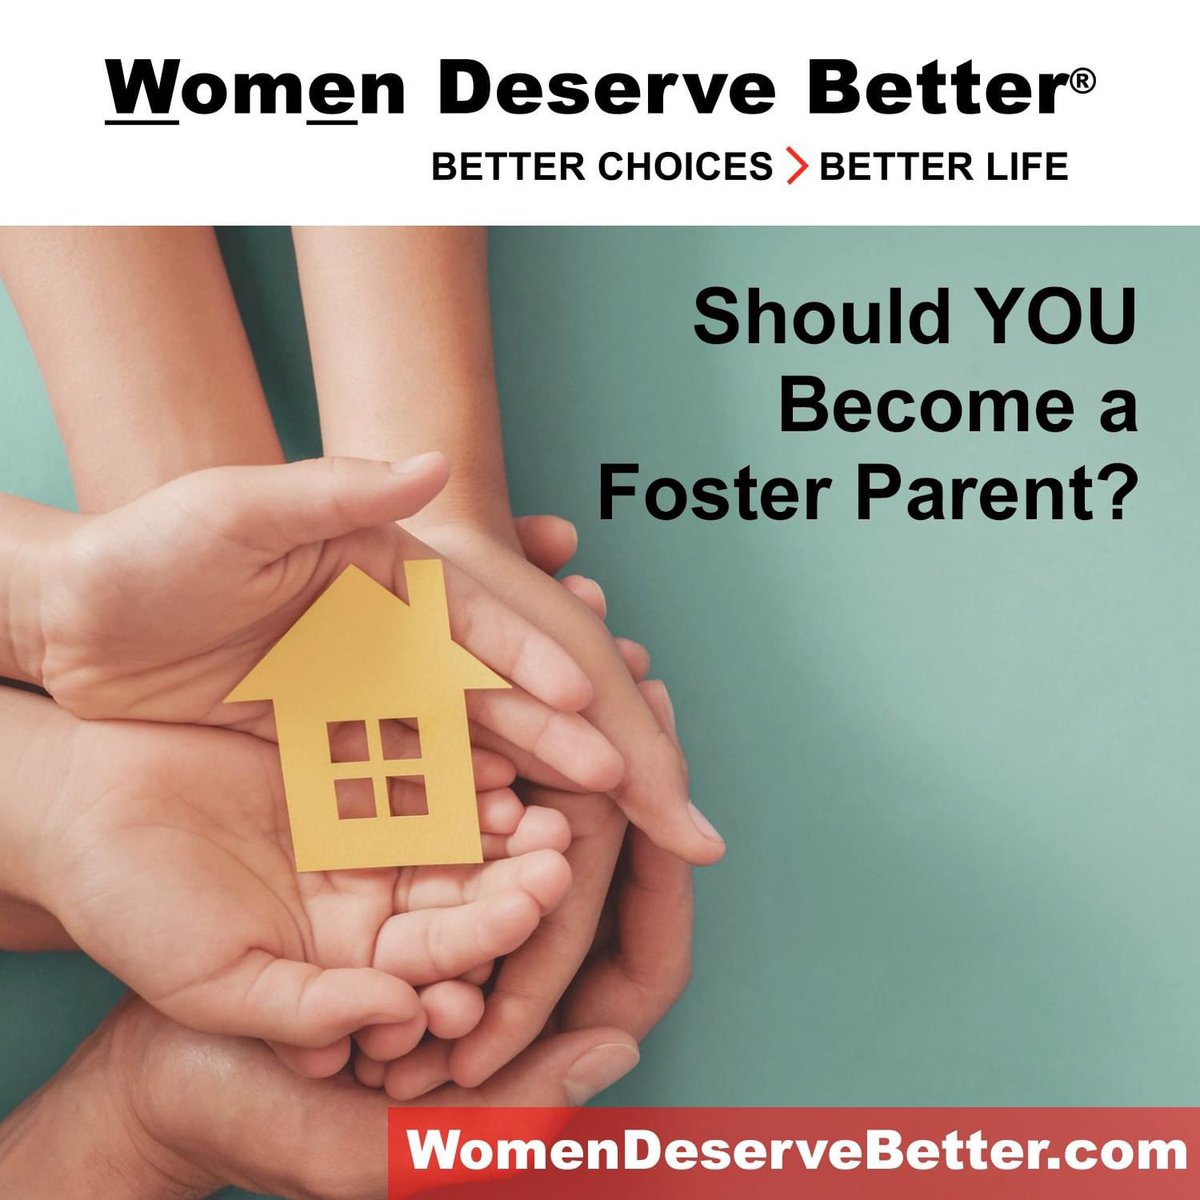 May is National Foster Care Month. There are over 428,000 children, on any given day, in the foster care system here in America. There is also an increasing disparity between the number of children needing foster care and the number of foster parents who are able to care for